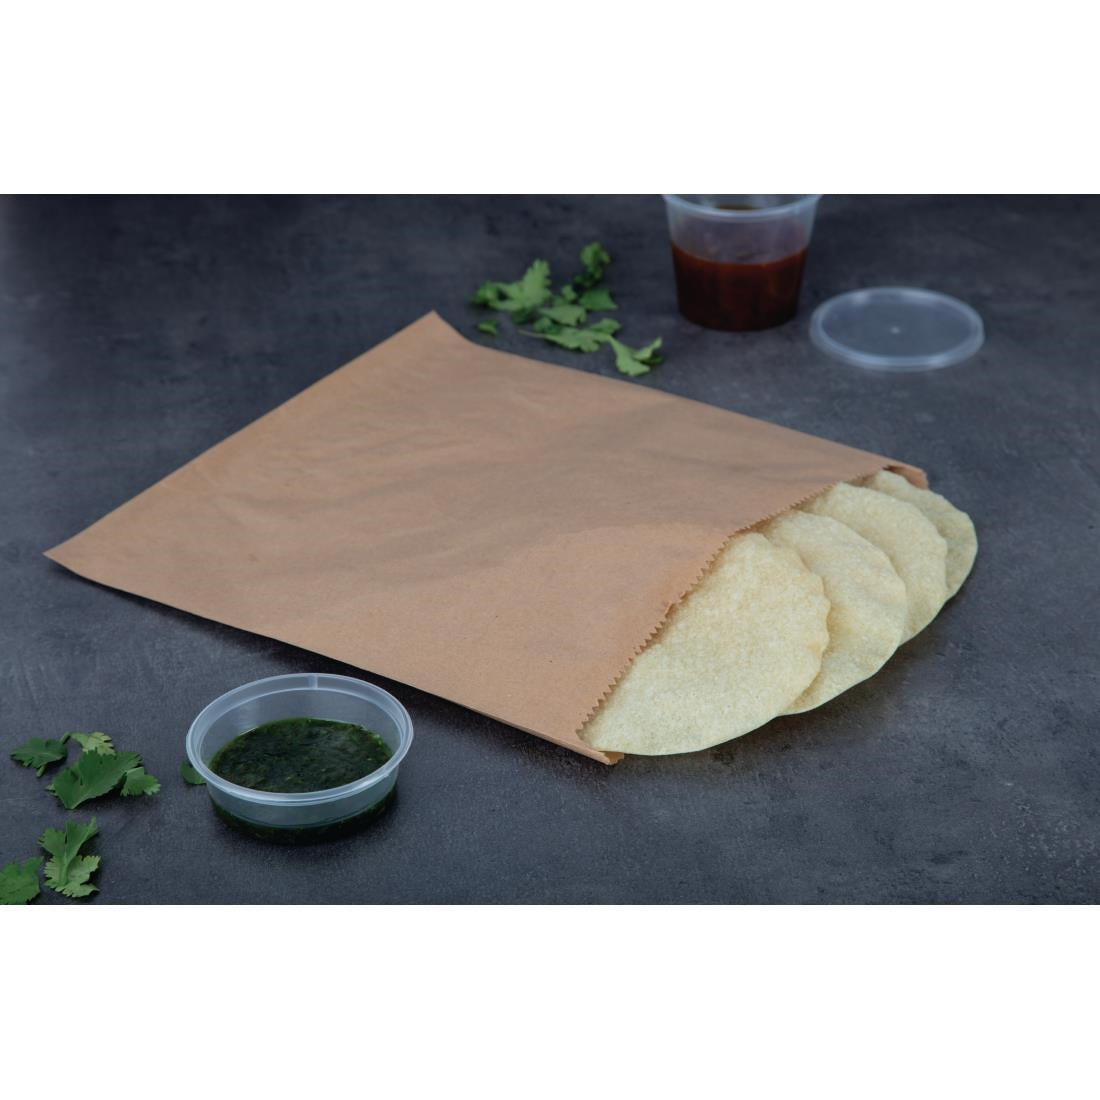 Fiesta Brown Paper Counter Bags (Pack of 1000) JD Catering Equipment Solutions Ltd